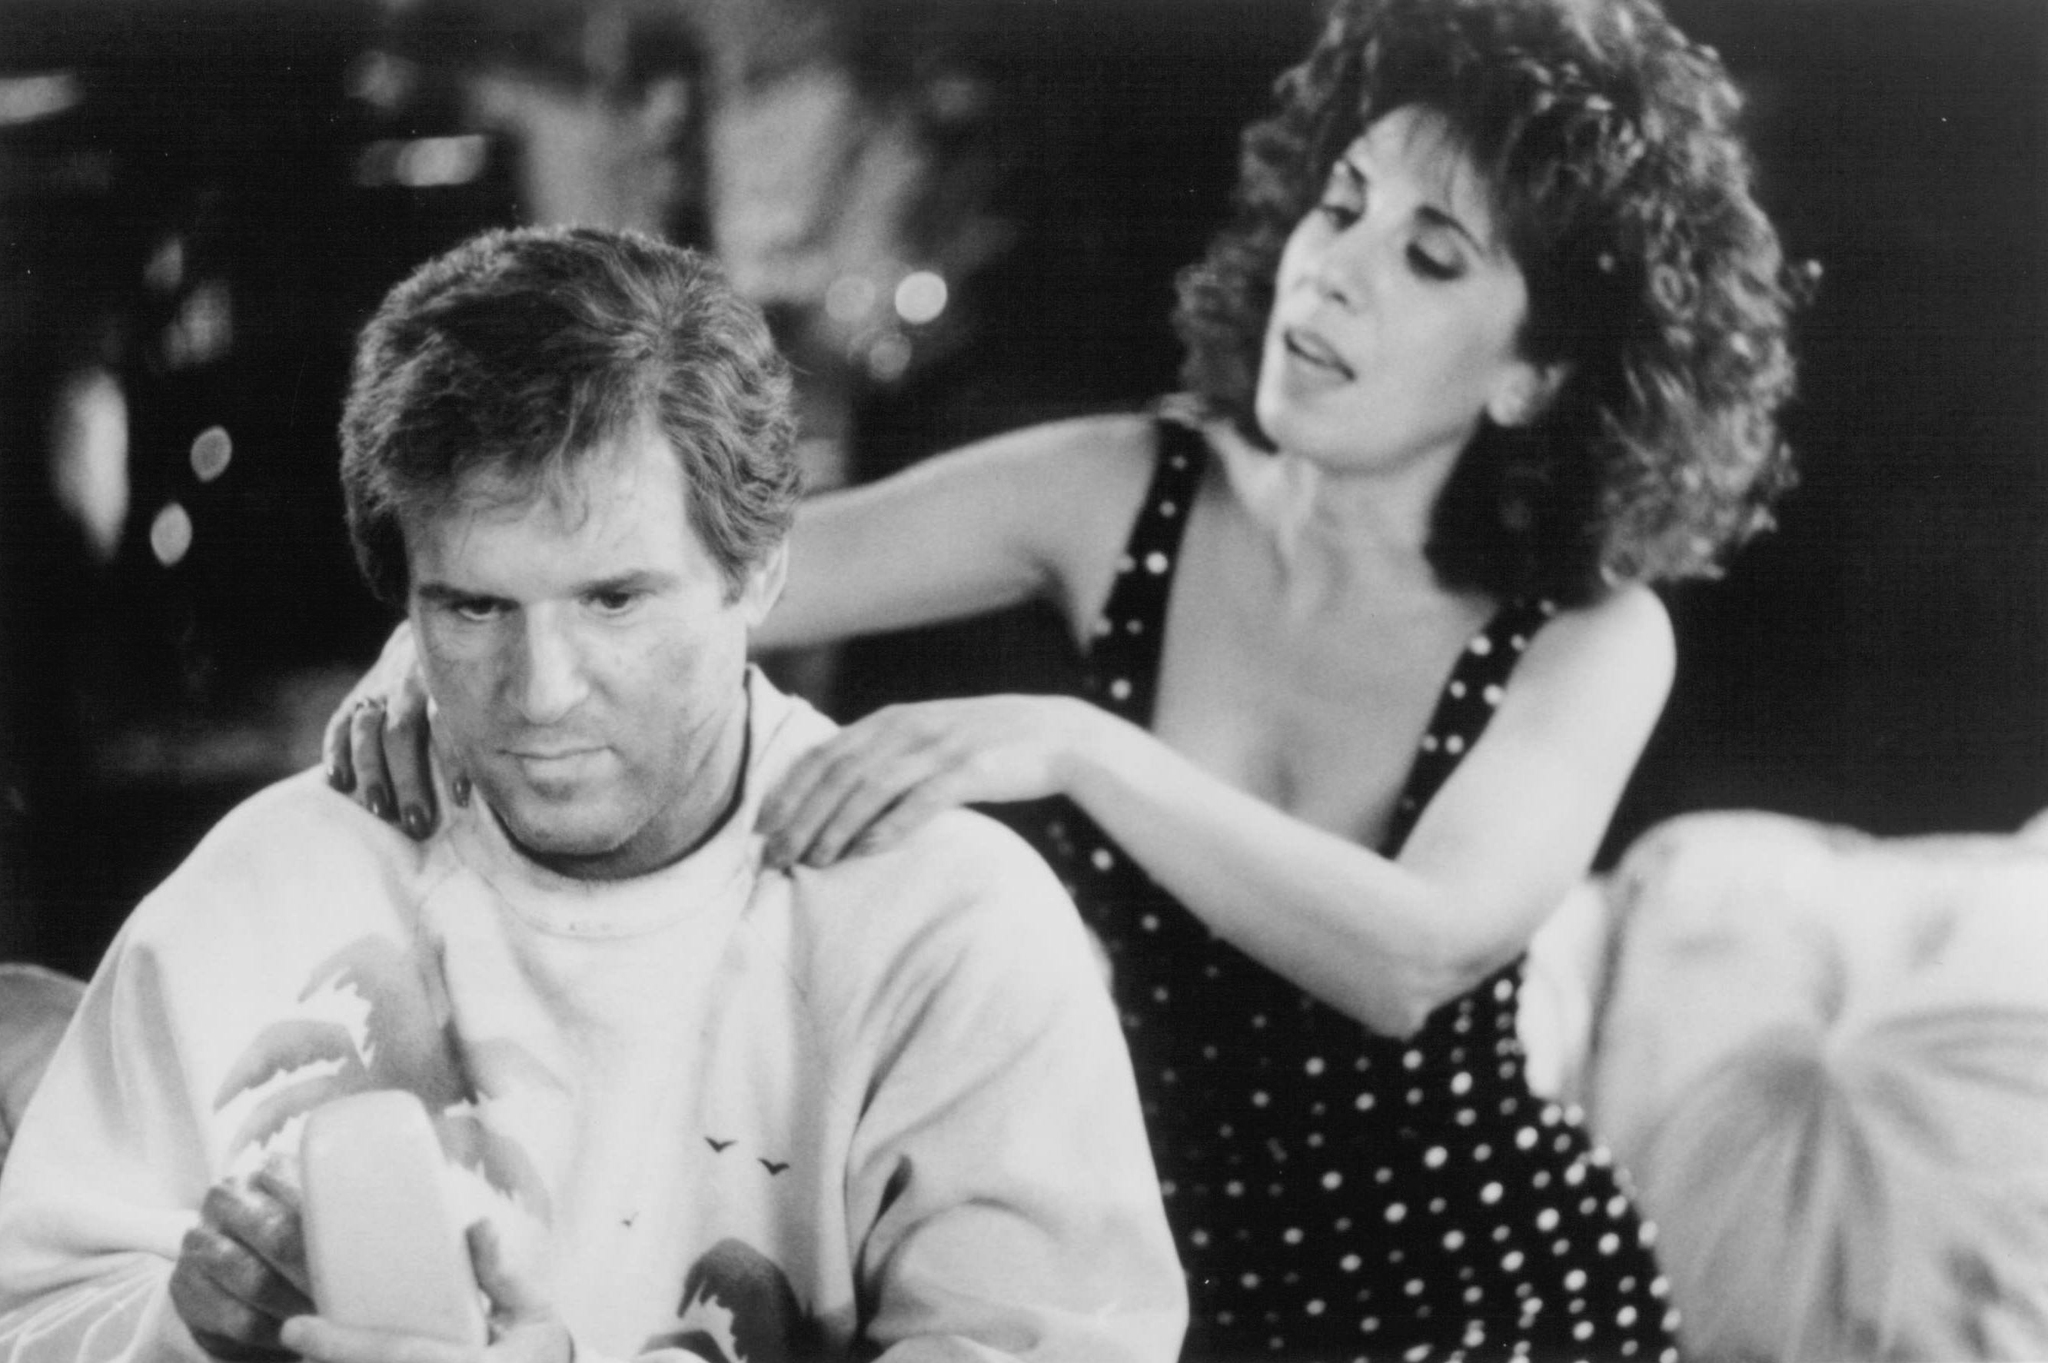 Still of Charles Grodin in Taking Care of Business (1990)